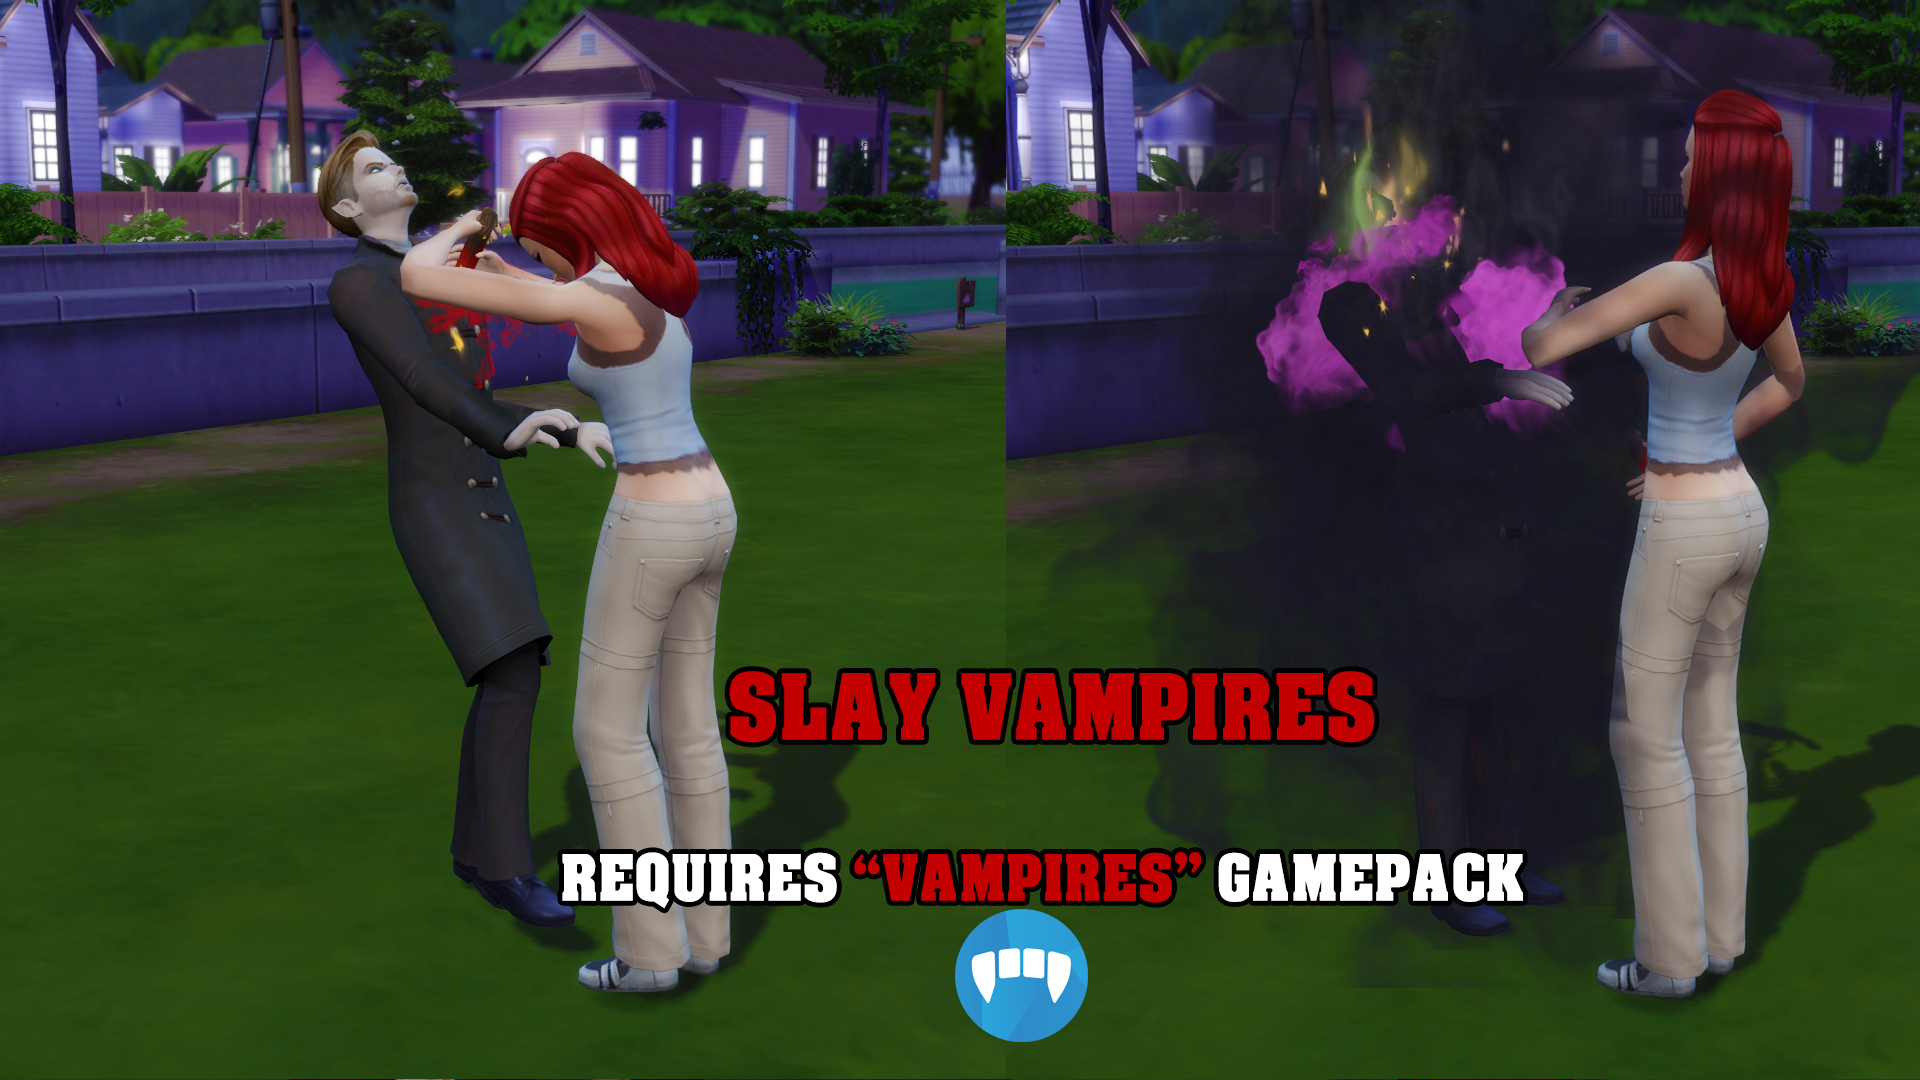 download extreme violence woof woof sims 4 mod